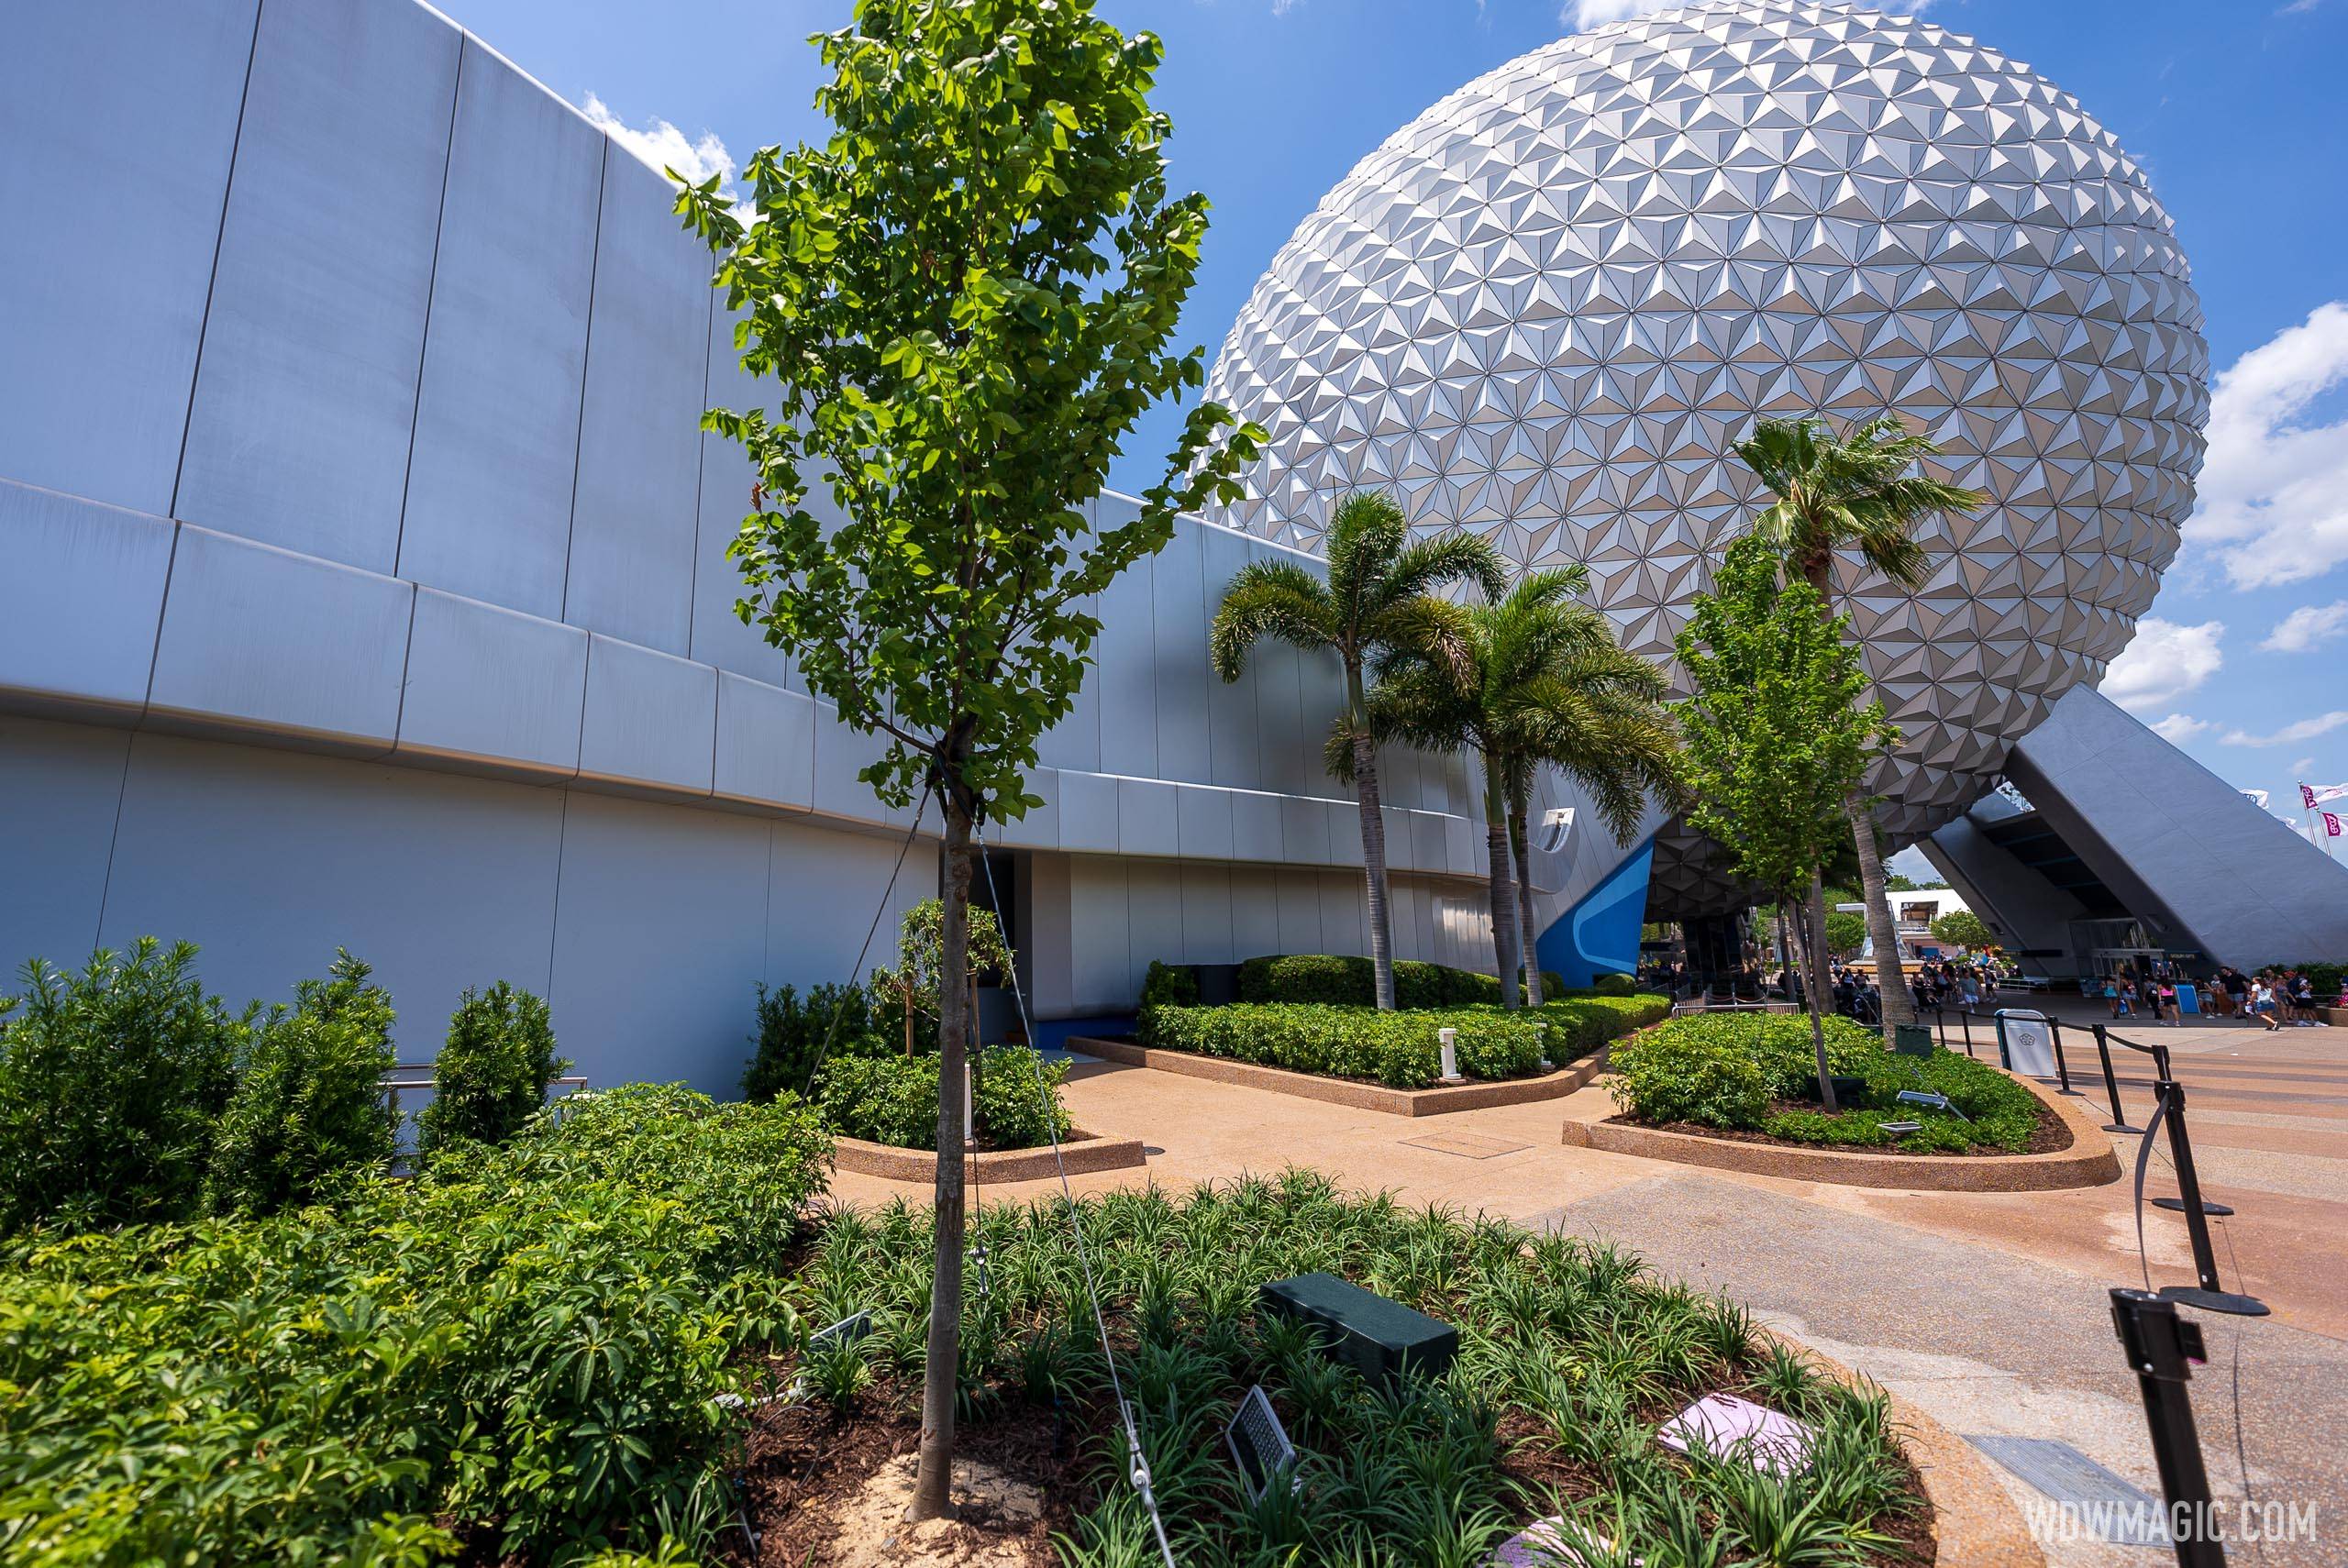 New landscaping in World Celebration near Spaceship Earth